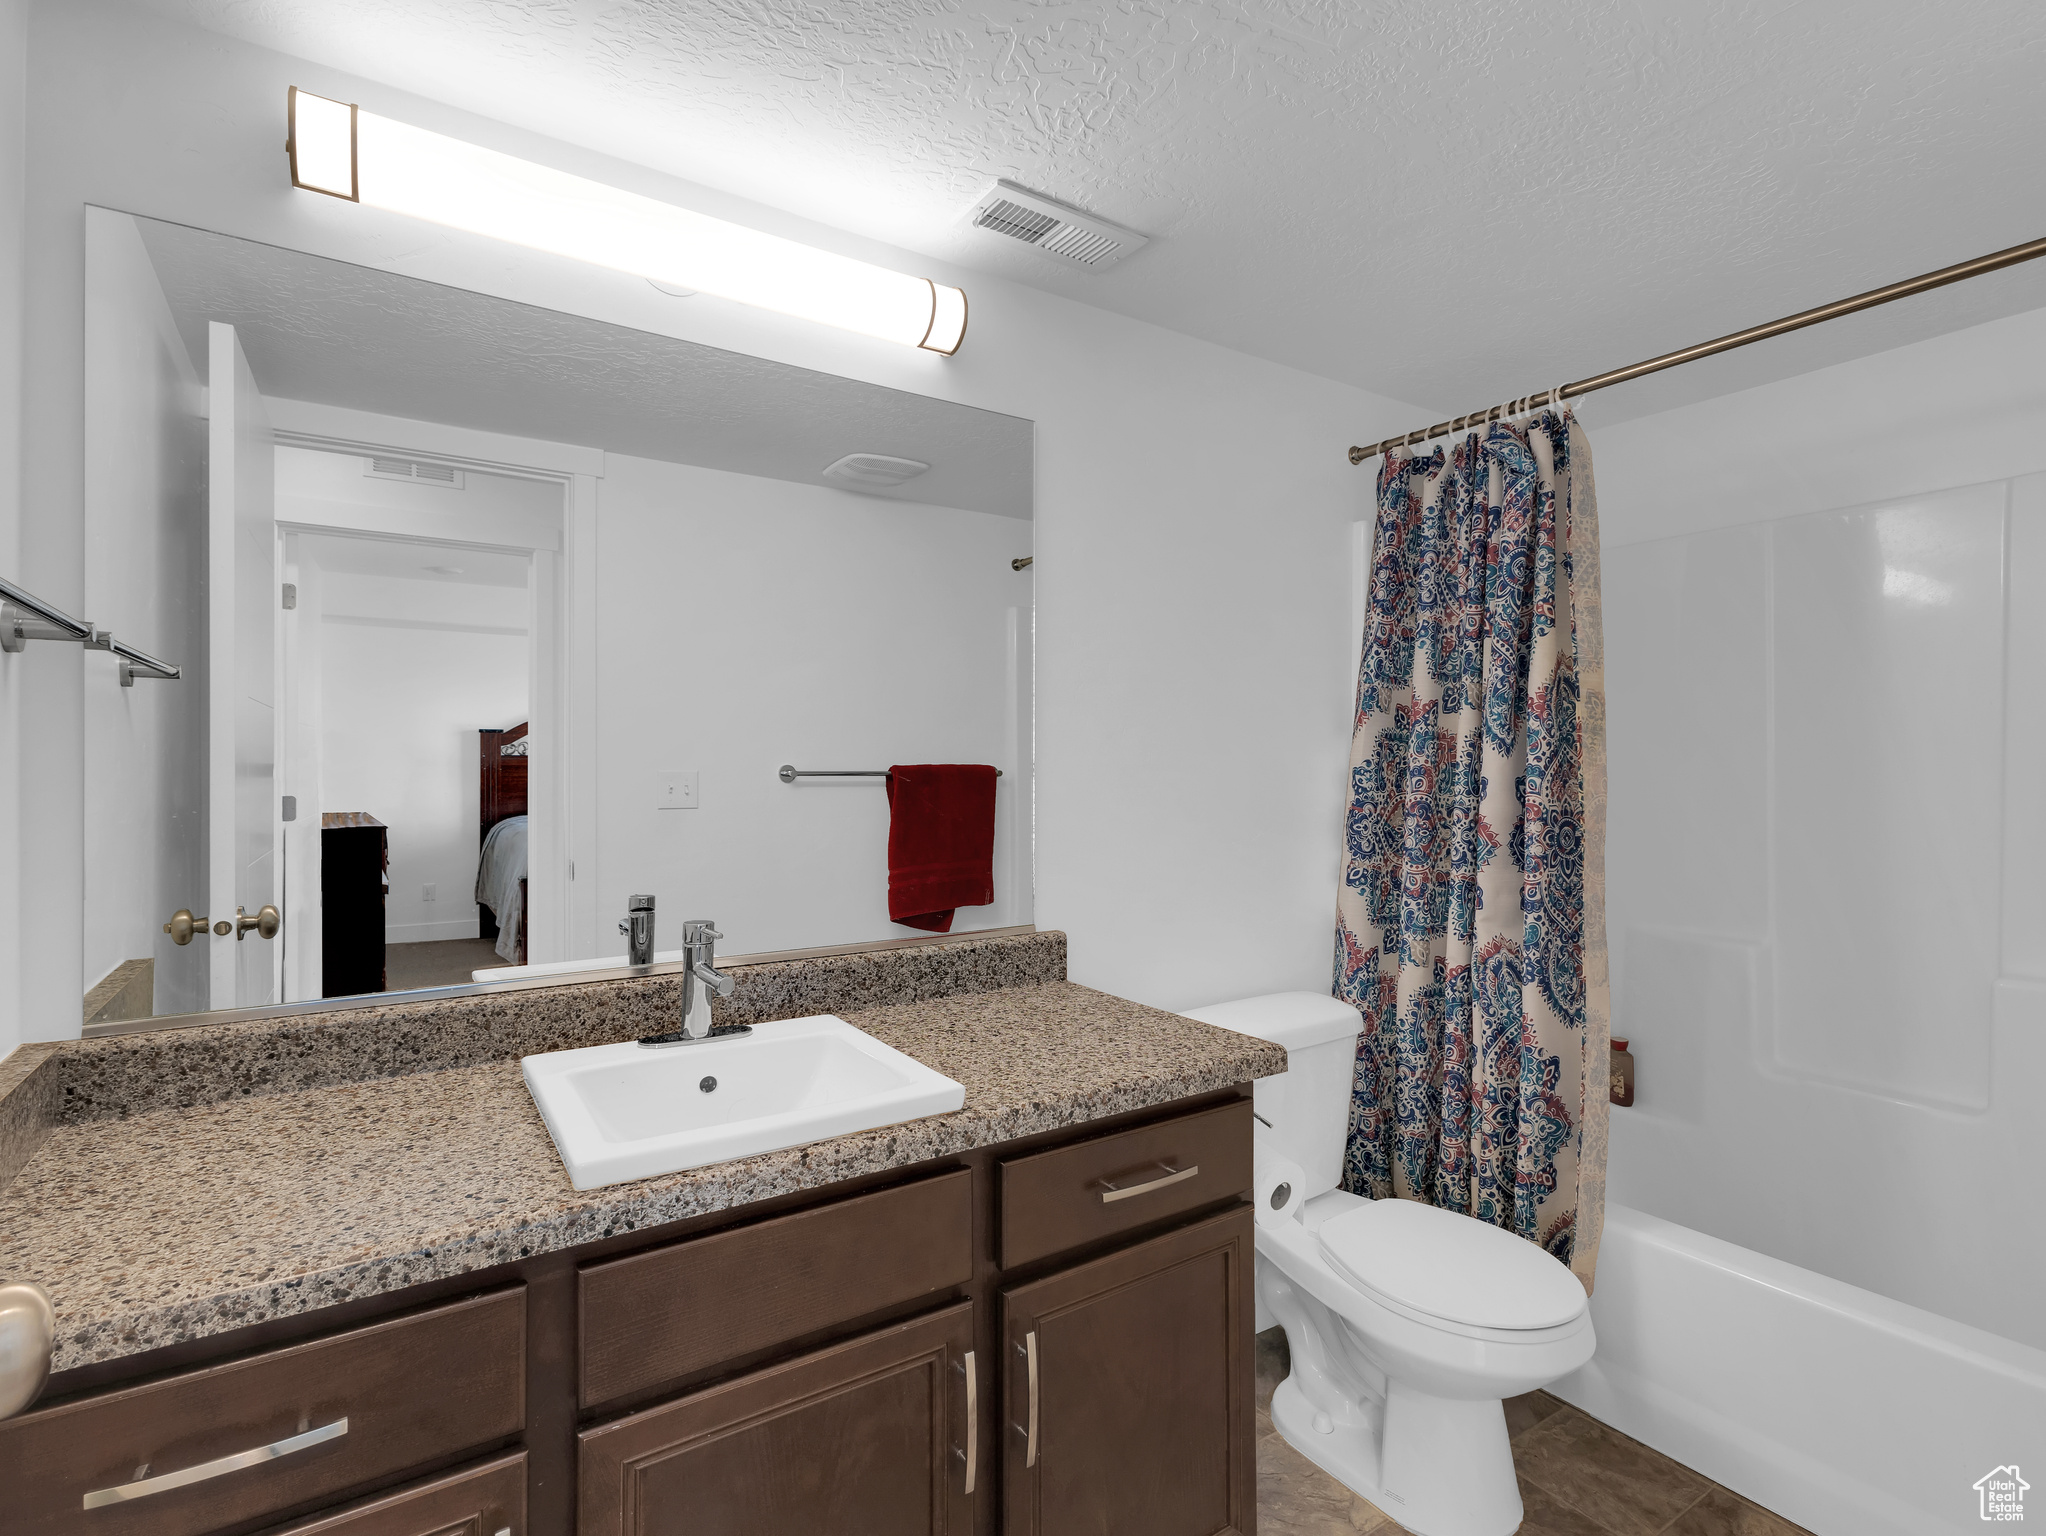 Full bathroom featuring shower / bath combo with shower curtain, a textured ceiling, oversized vanity, tile floors, and toilet